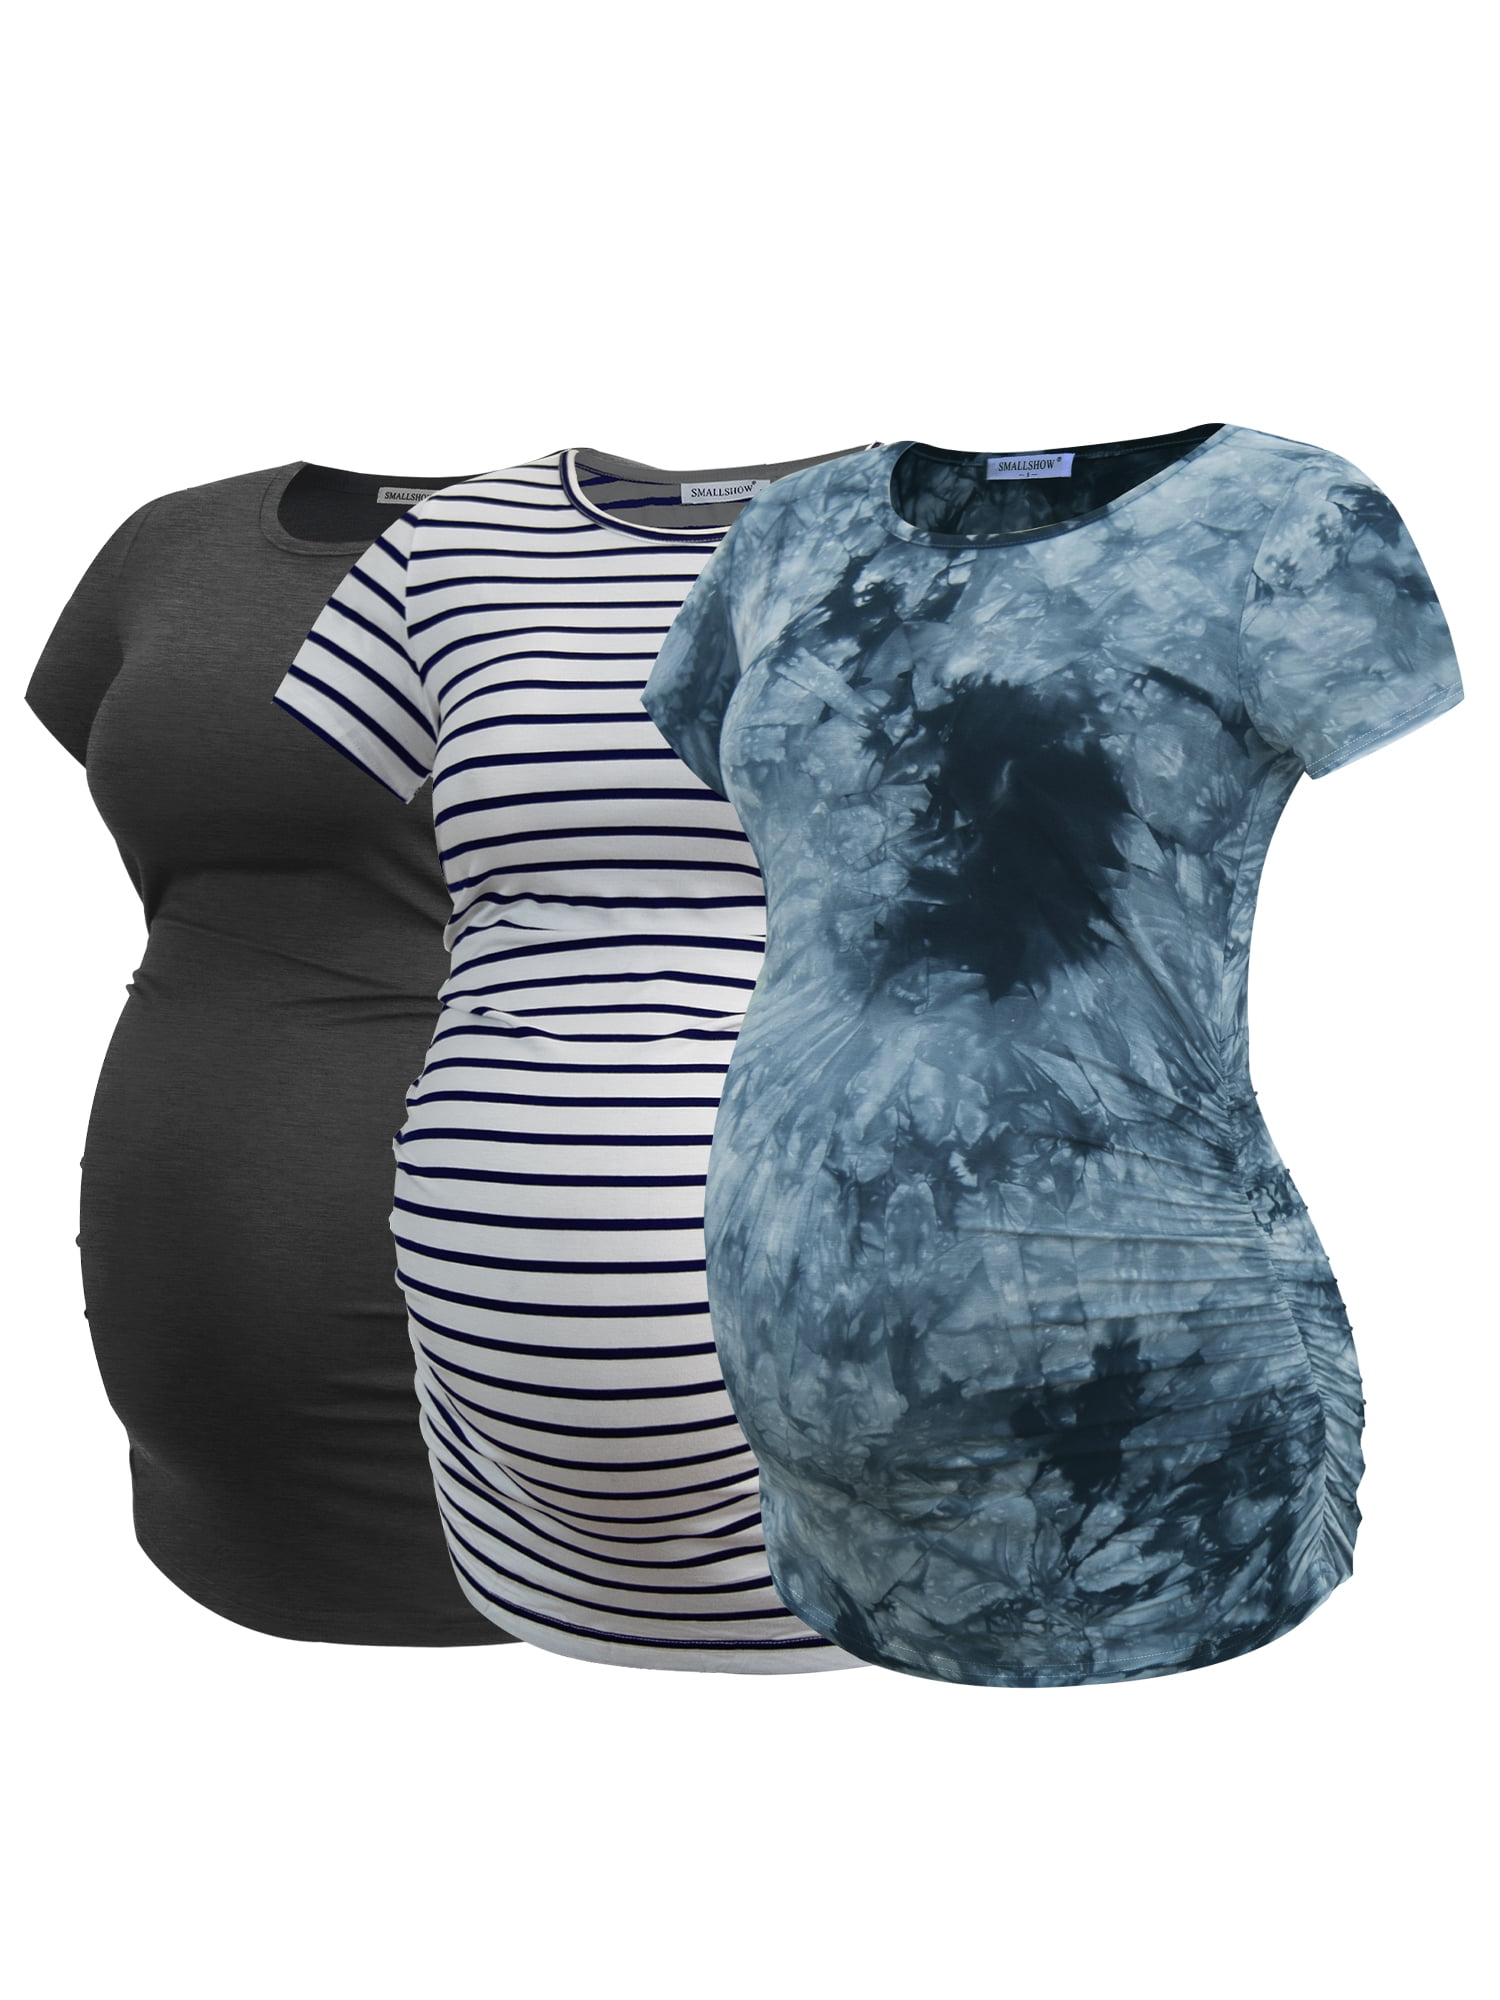 Smallshow Women's Maternity Shirts Tops Short Sleeve Ruched